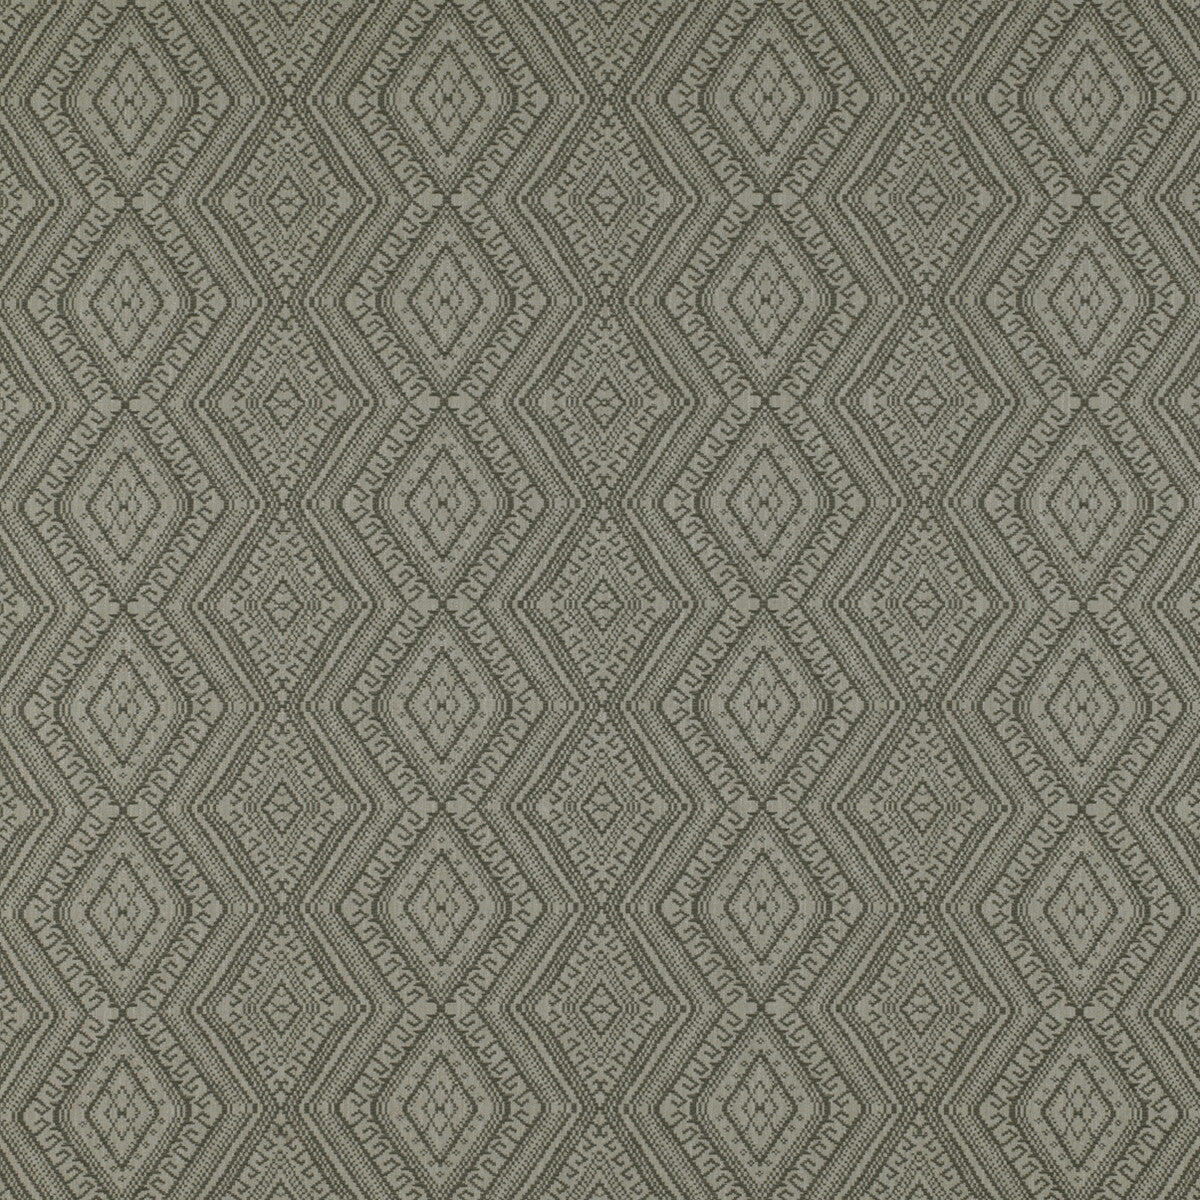 Milan fabric in gris color - pattern GDT5326.002.0 - by Gaston y Daniela in the Tierras collection